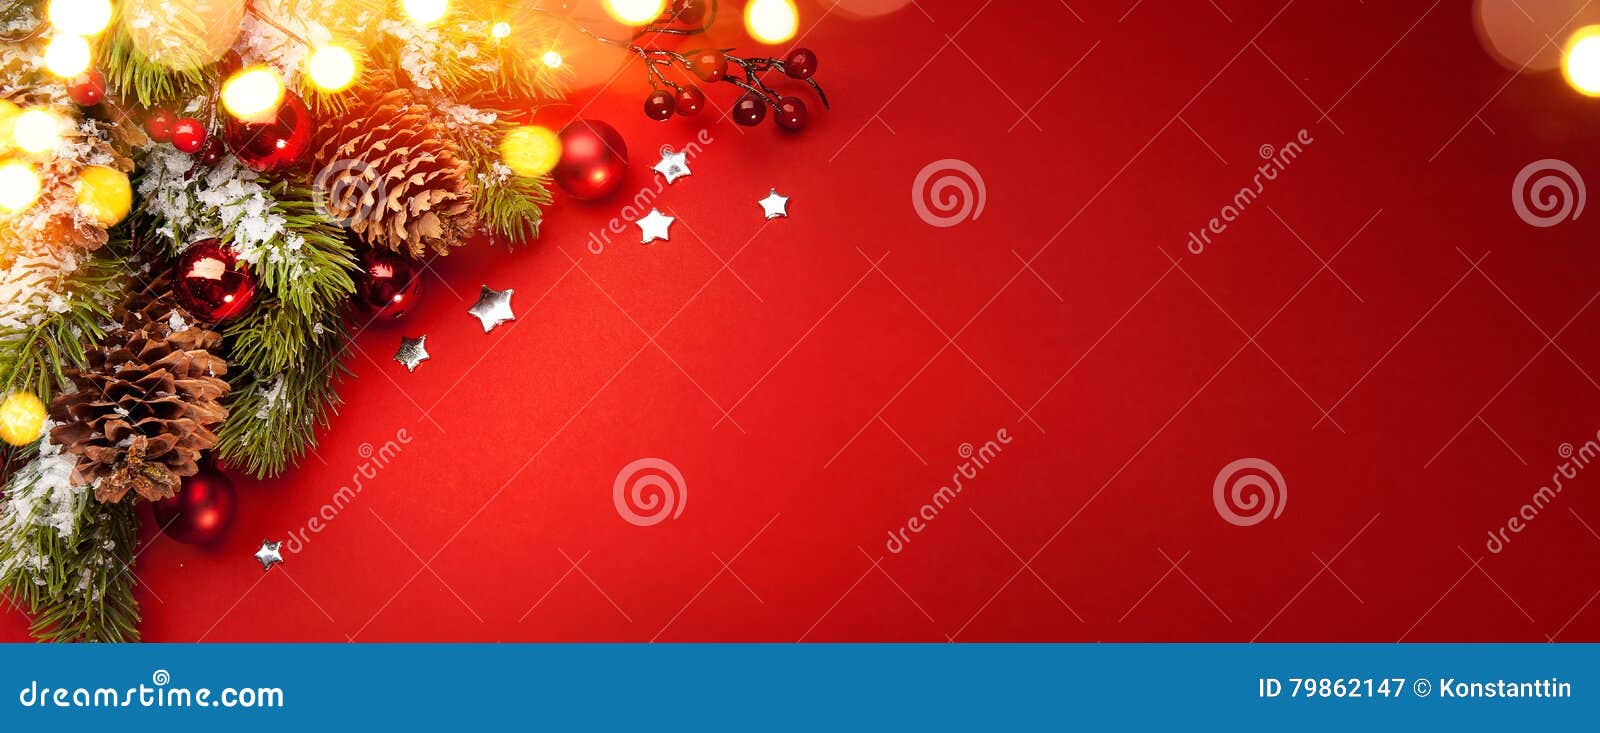 art red christmas holidays background; greeting card